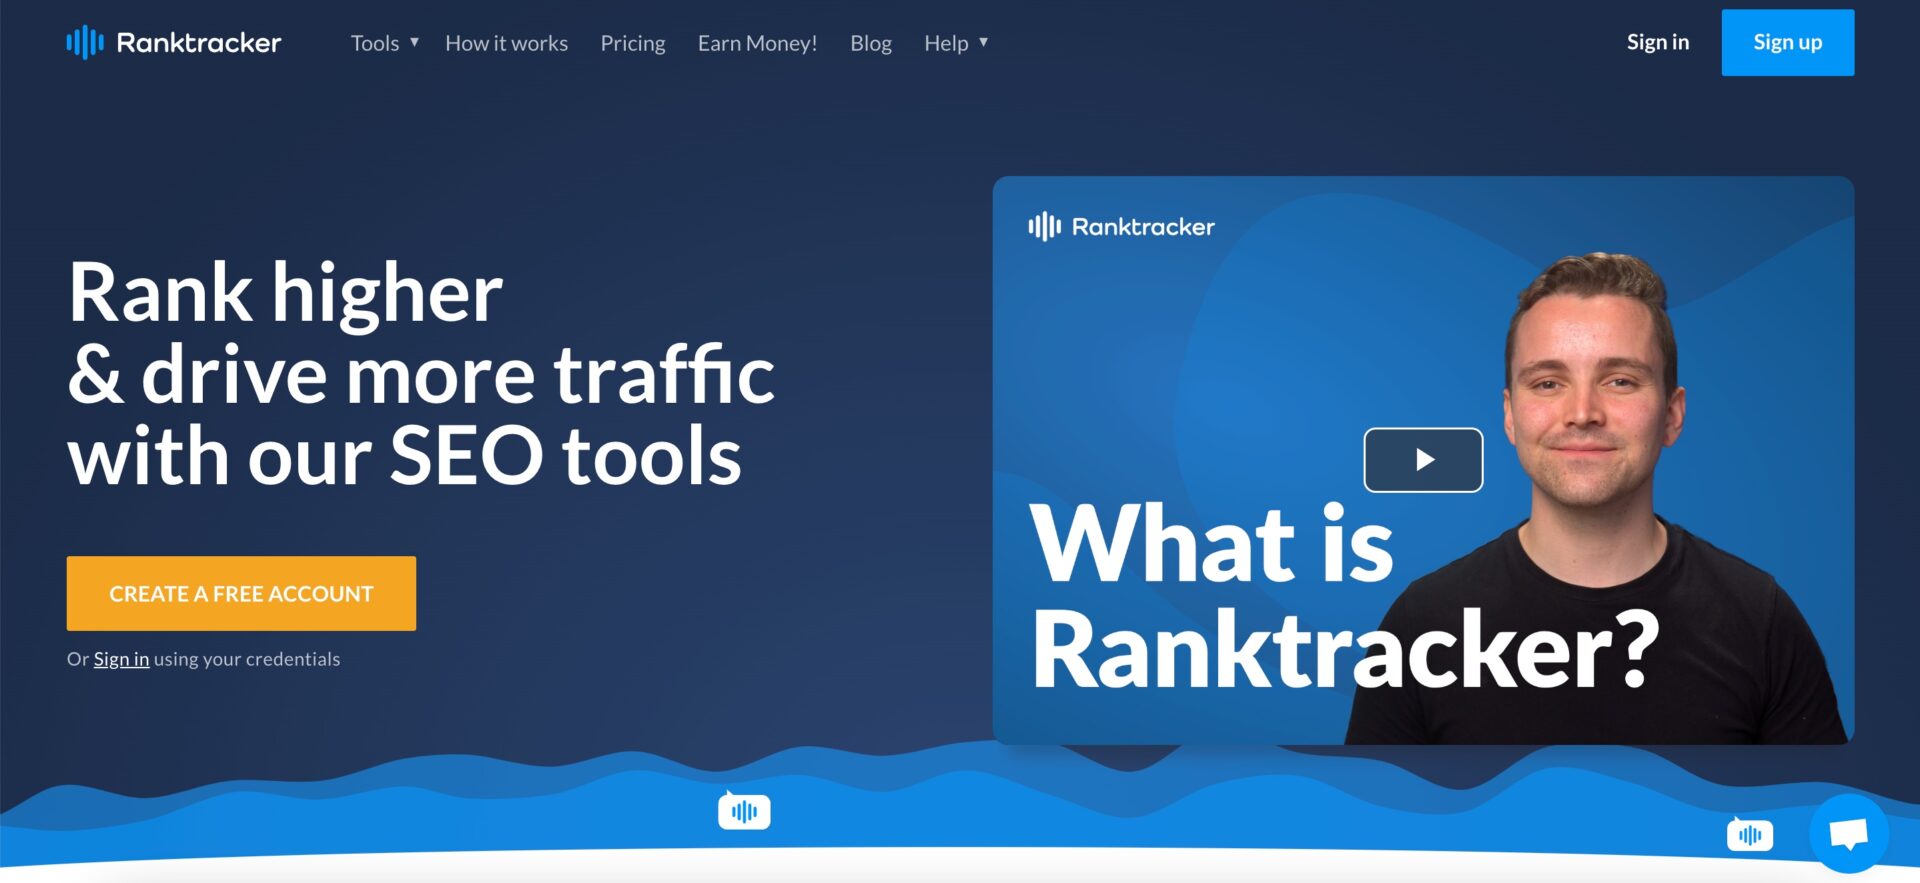 Startup landing page by Ranktracker with the well-exposed call to action